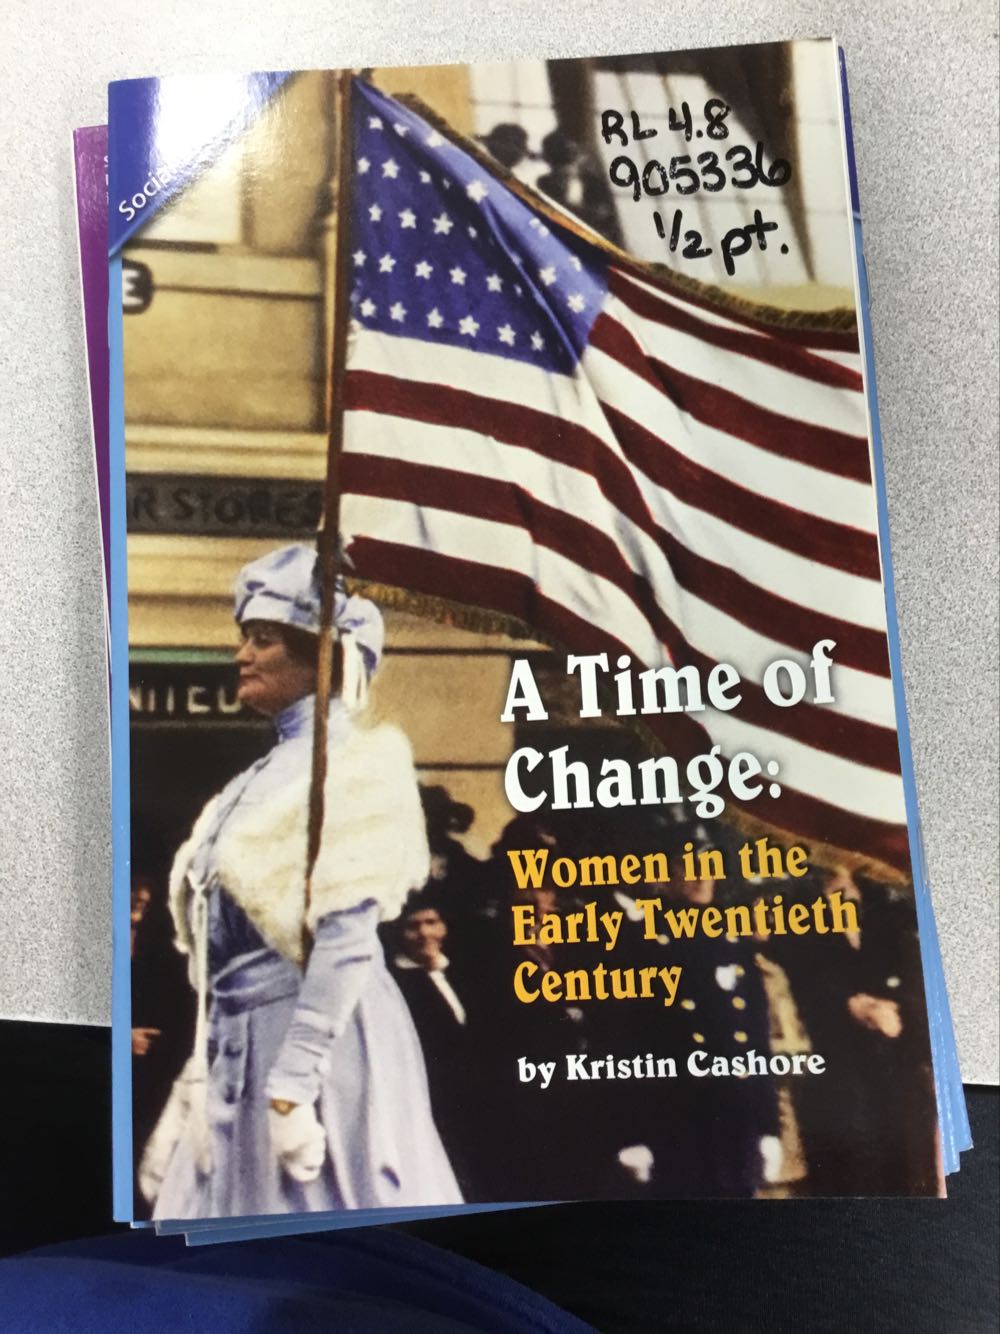 A Time of Change - Kristin Cashore (Scott Foresman) book collectible [Barcode 9780328133789] - Main Image 1